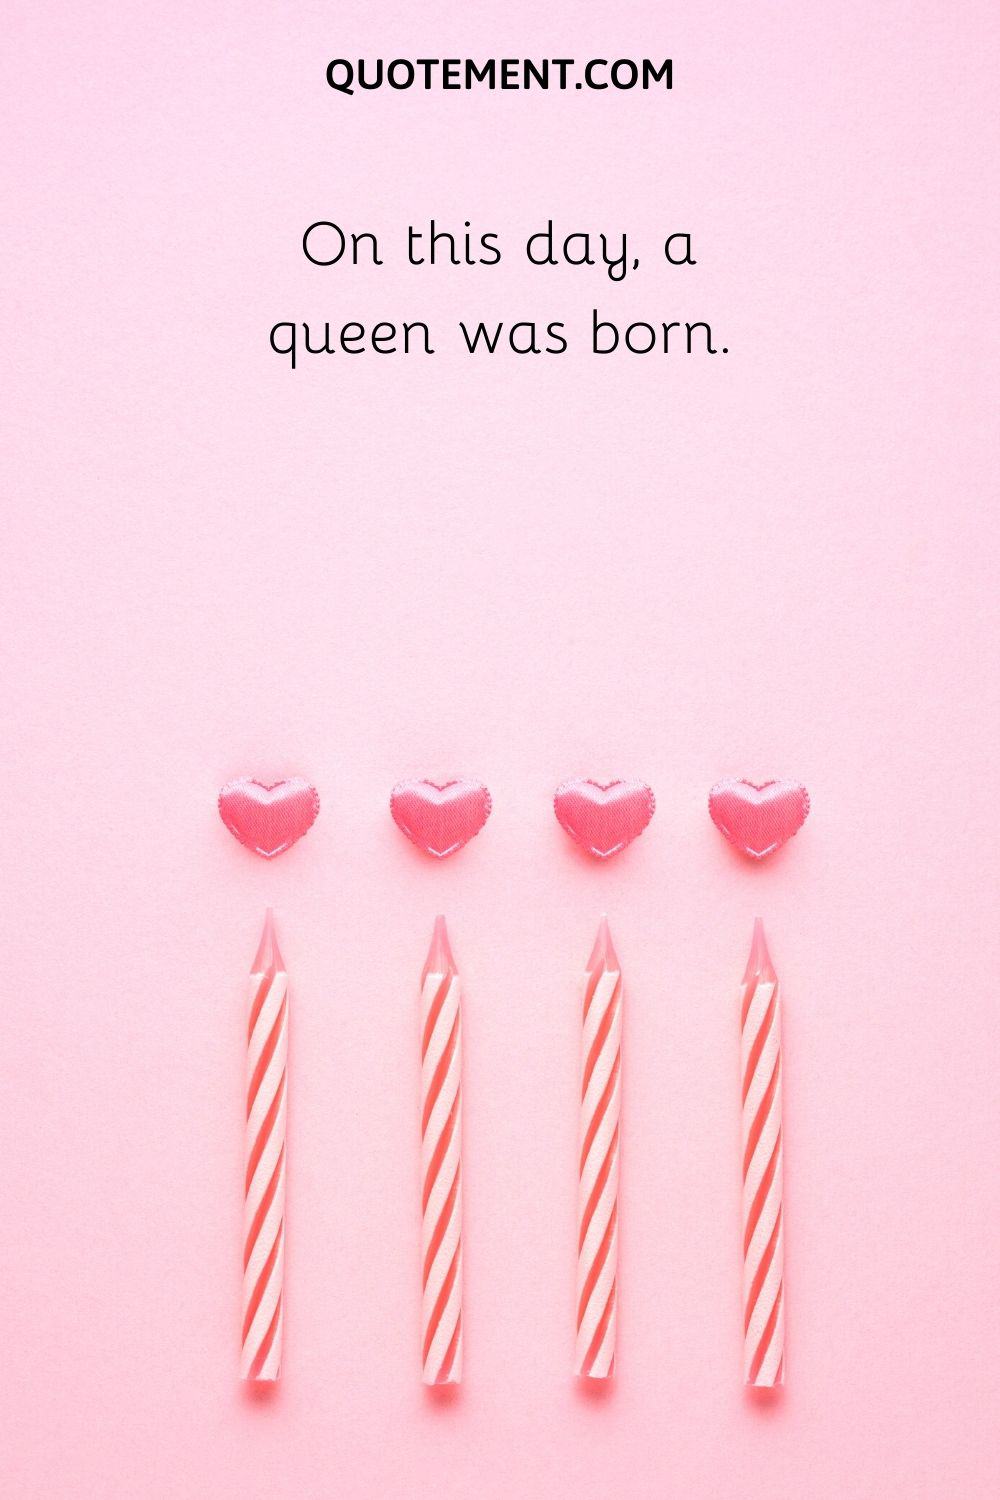 On this day, a queen was born